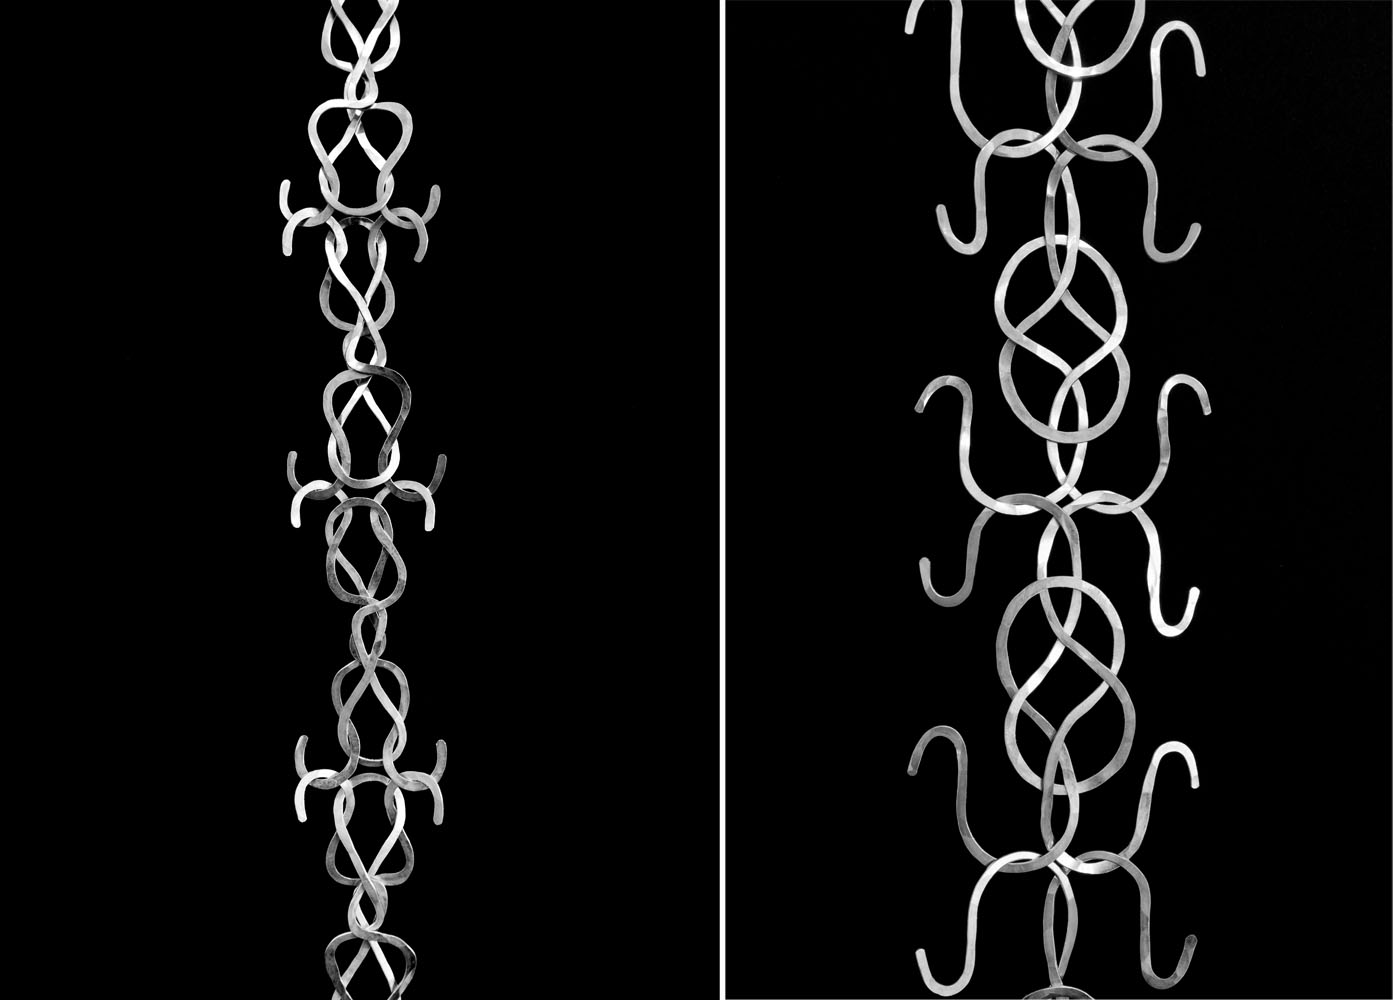 Two images of flattened silver wire in shapes that repeat to form an interlocking chain.